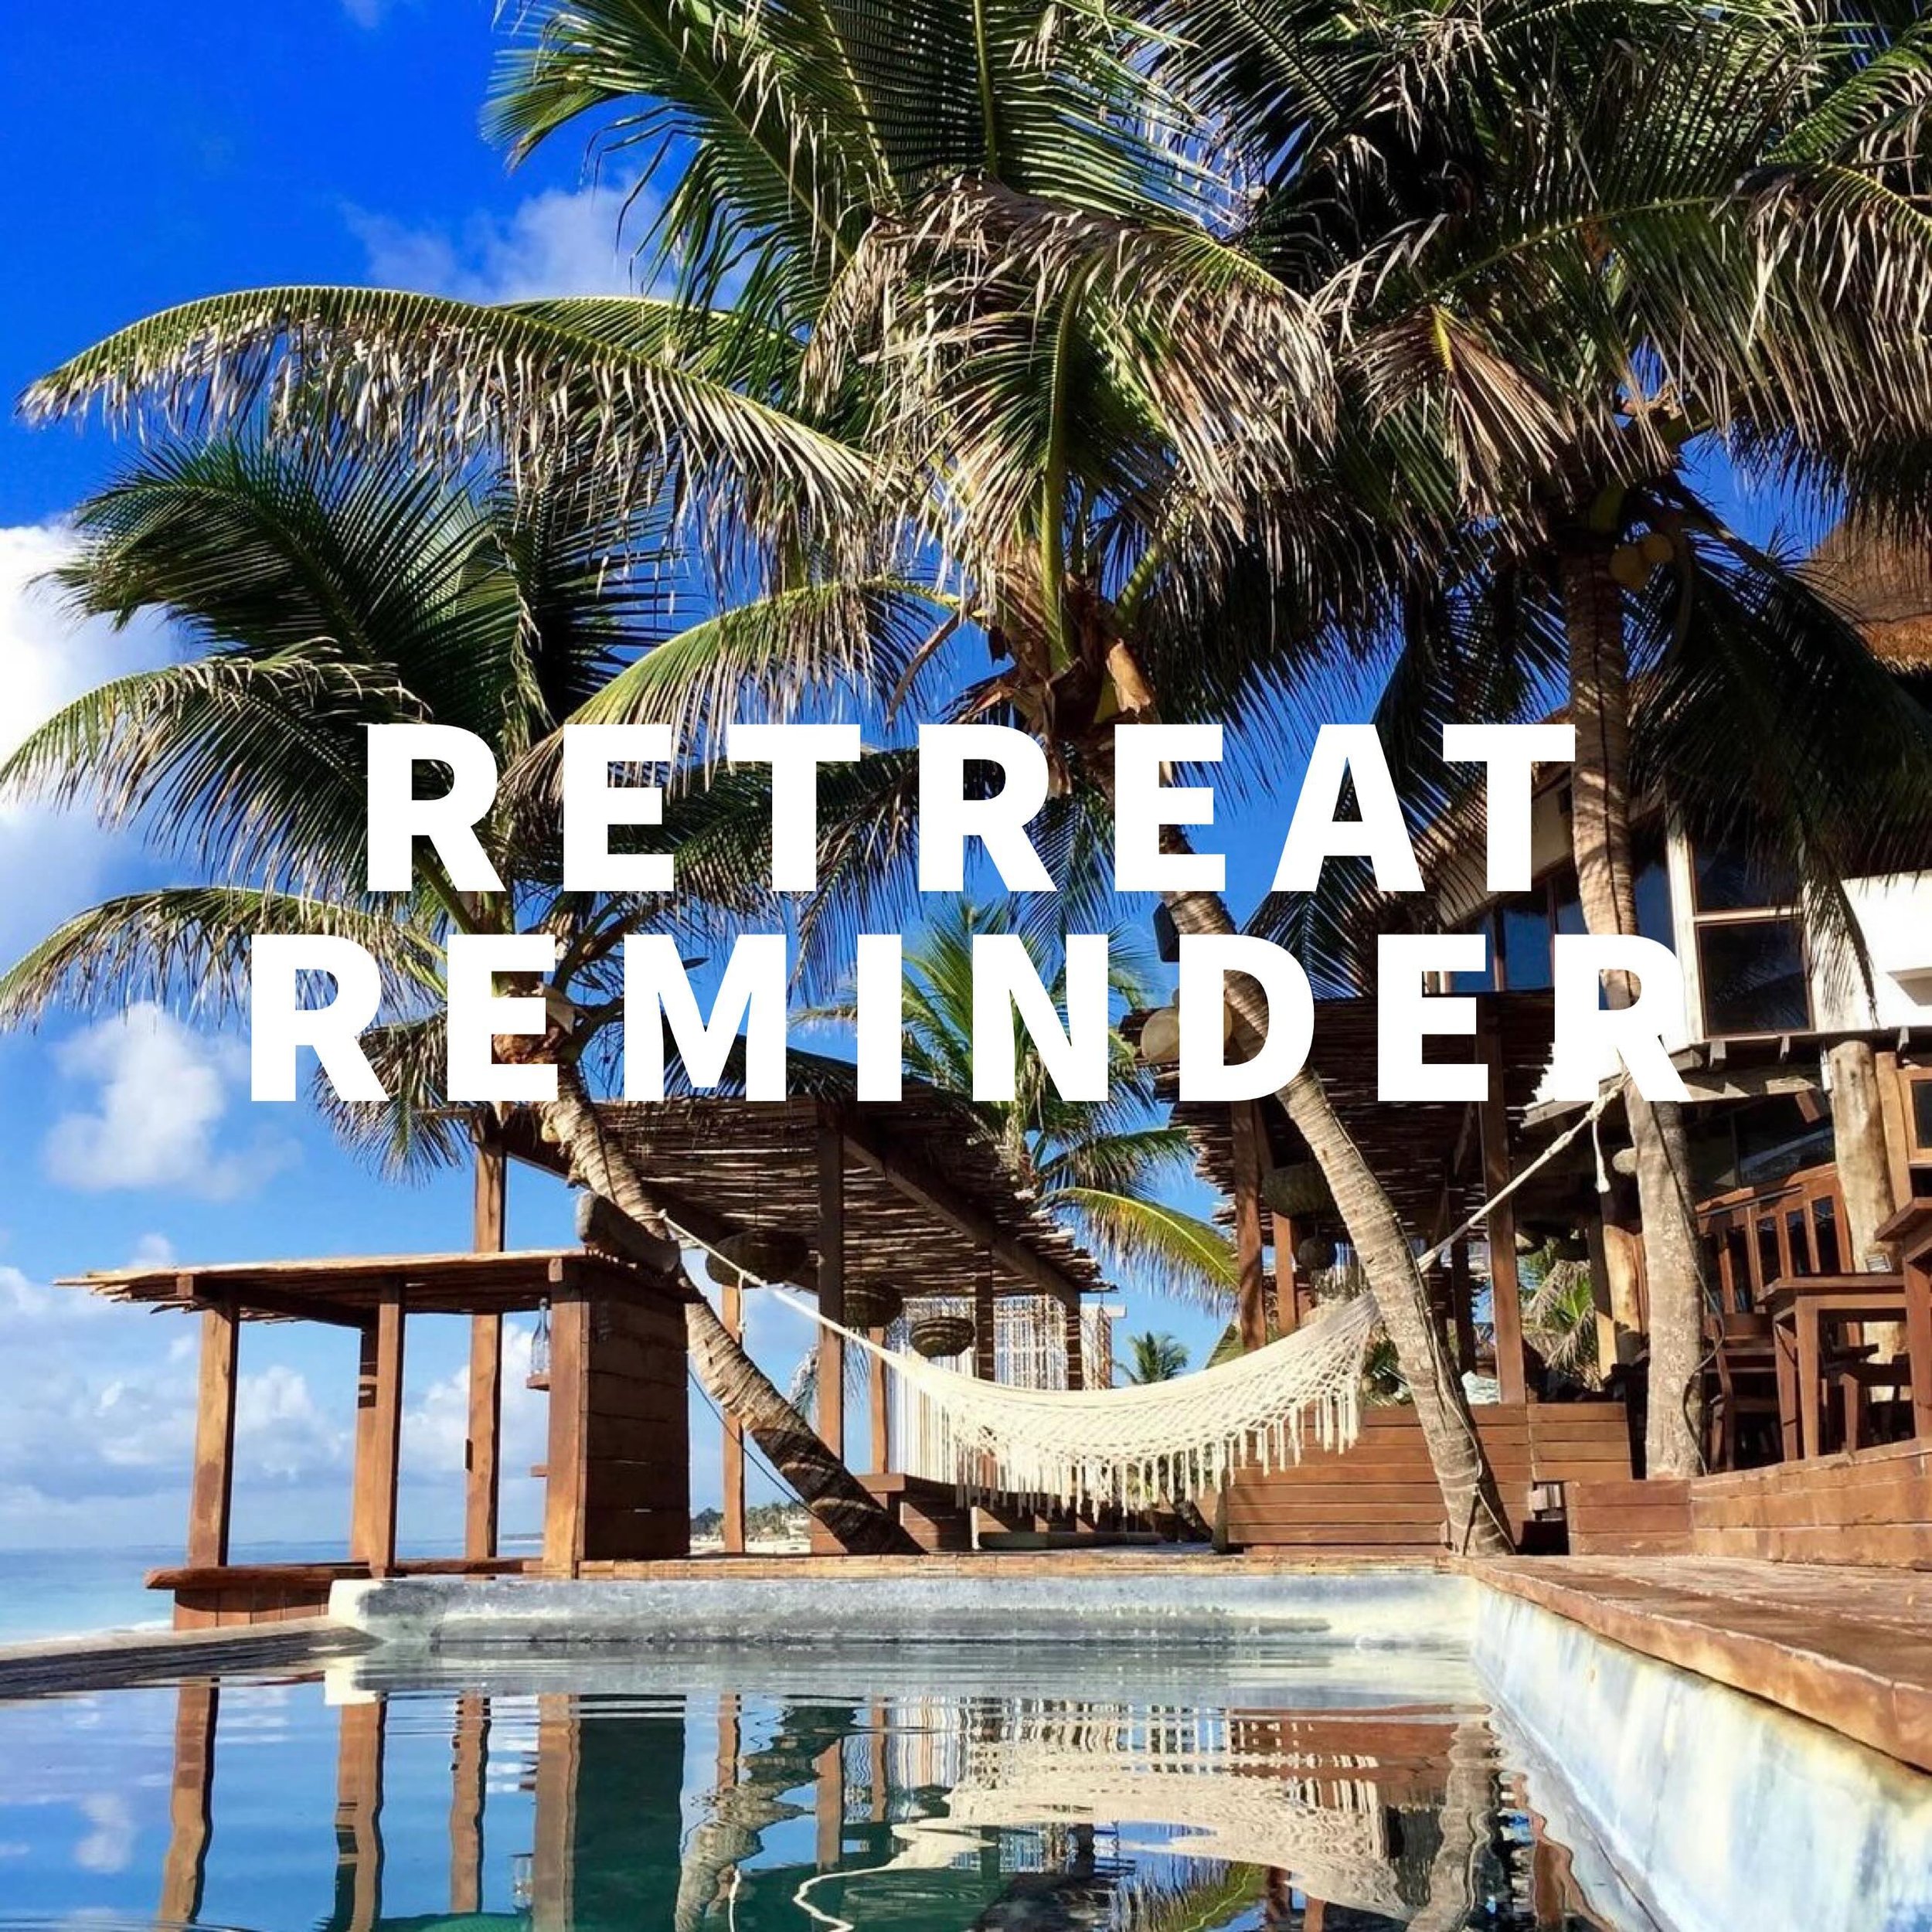 A reminder to our community that Michele &amp; Alyssa are away leading our Retreat in Tulum, Mexico until 5/11/24. Please allow for additional time to return emails and phone calls.

Reya&rsquo;s class schedule is mostly normal while we are away, but